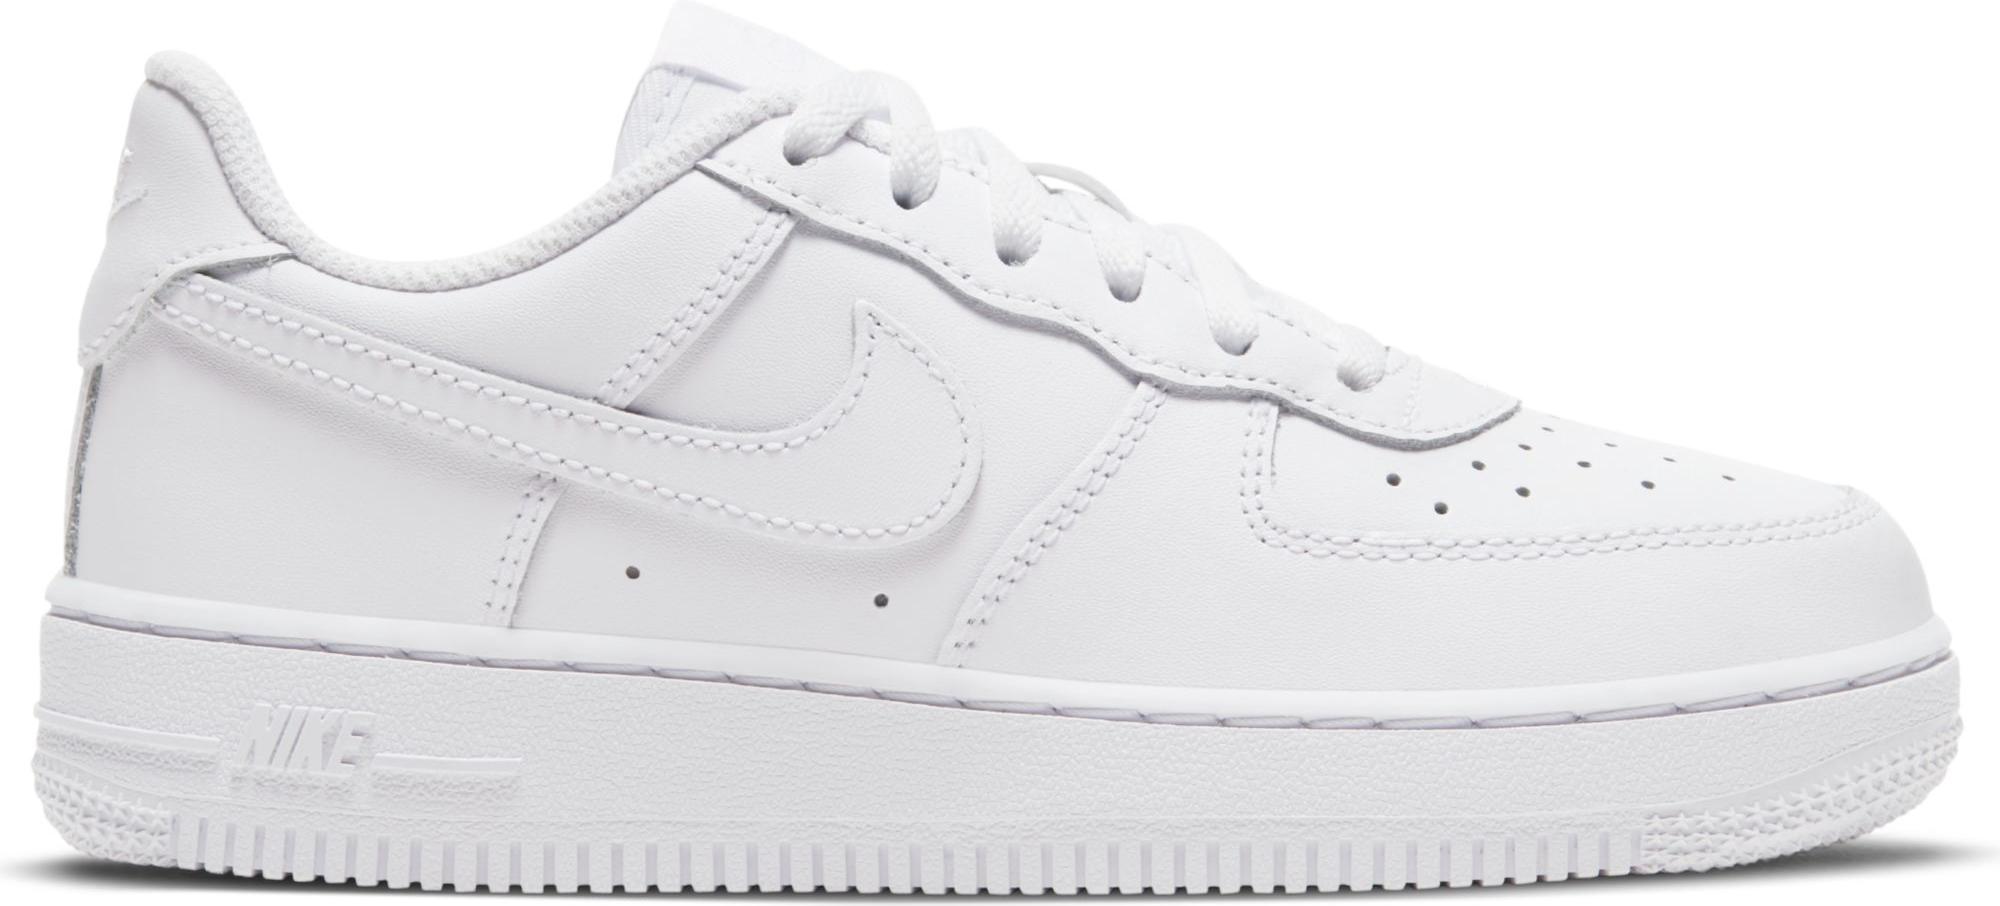 Incaltaminte Nike FORCE 1 LE (PS)